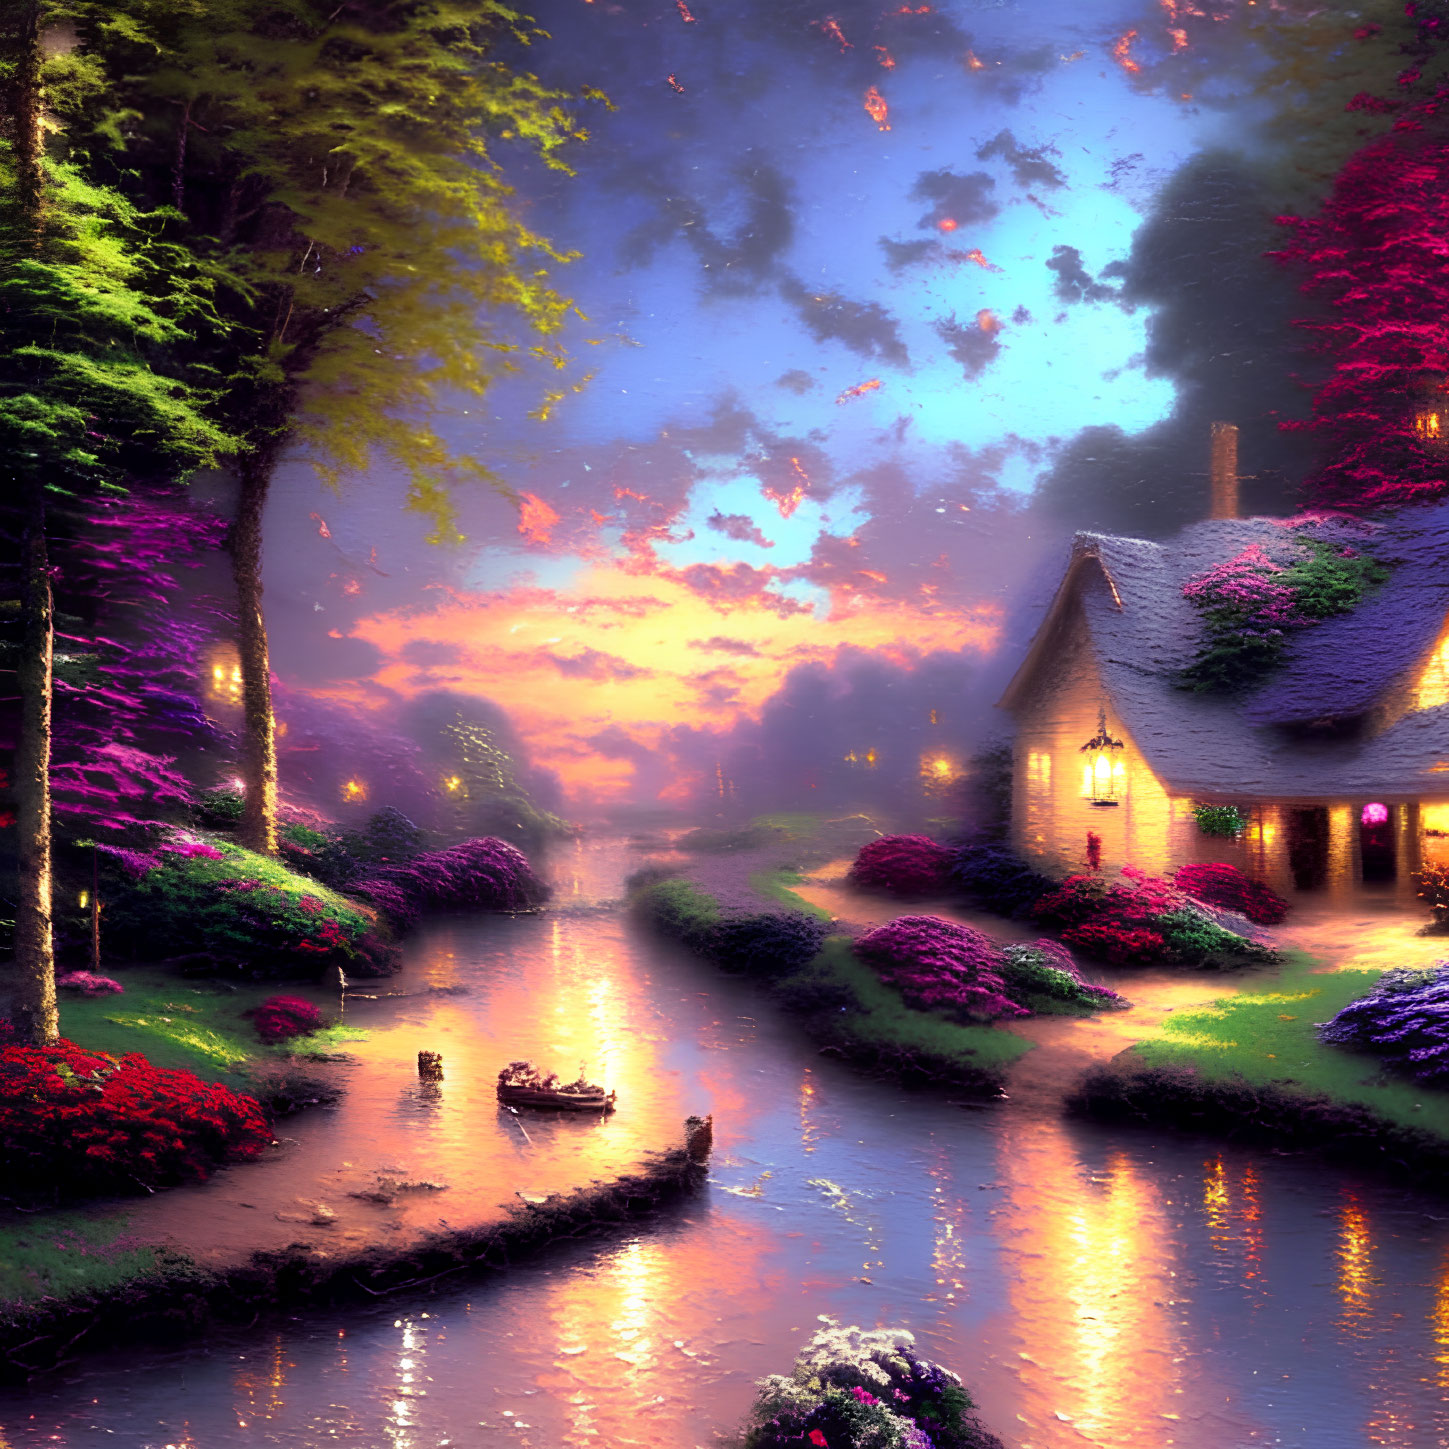 Tranquil riverside cottage at twilight with vibrant flowers